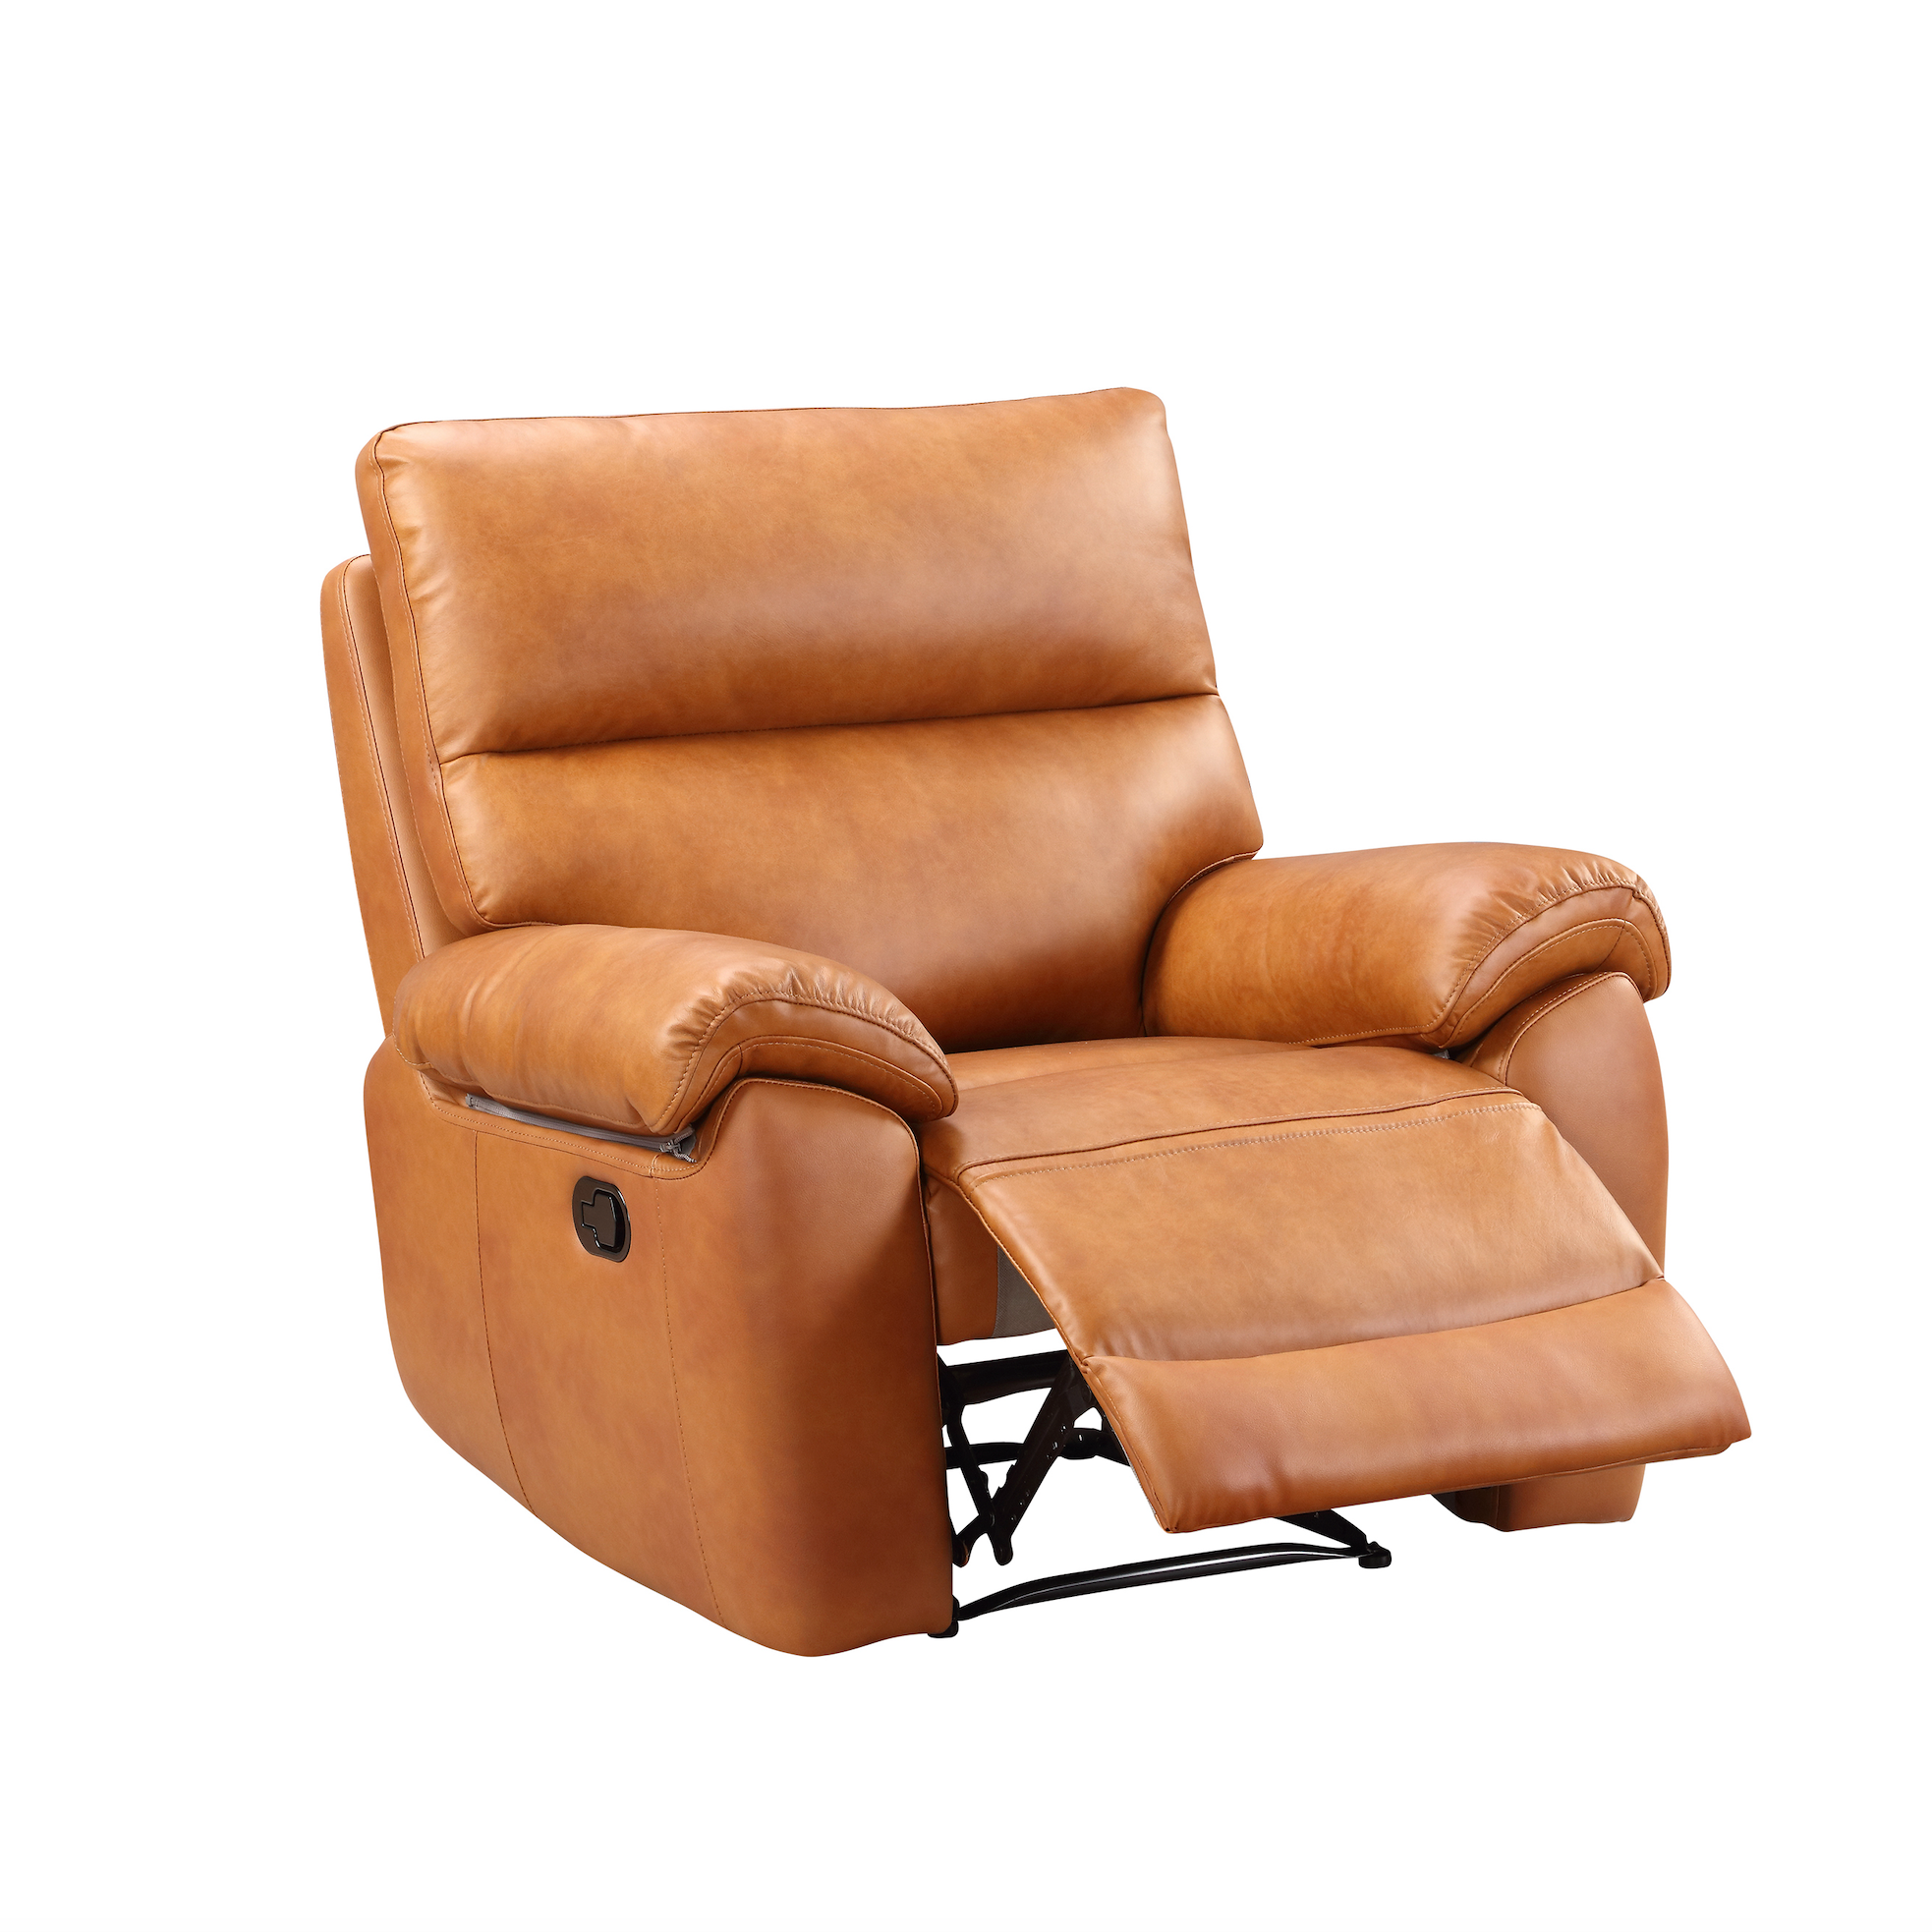 Rocco Power Recliner Chair Tan Leather